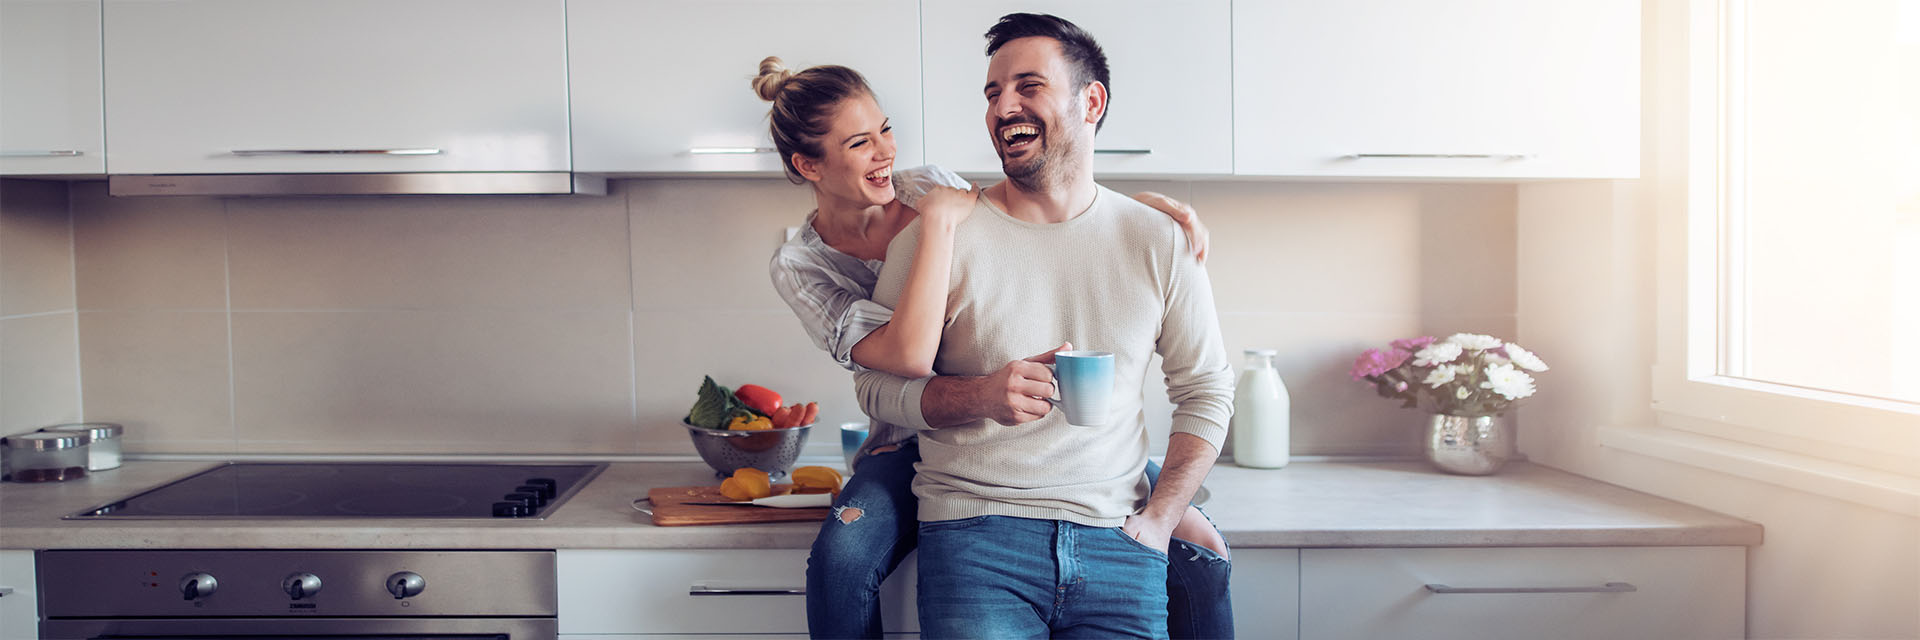 Young couple smiling in kitchen